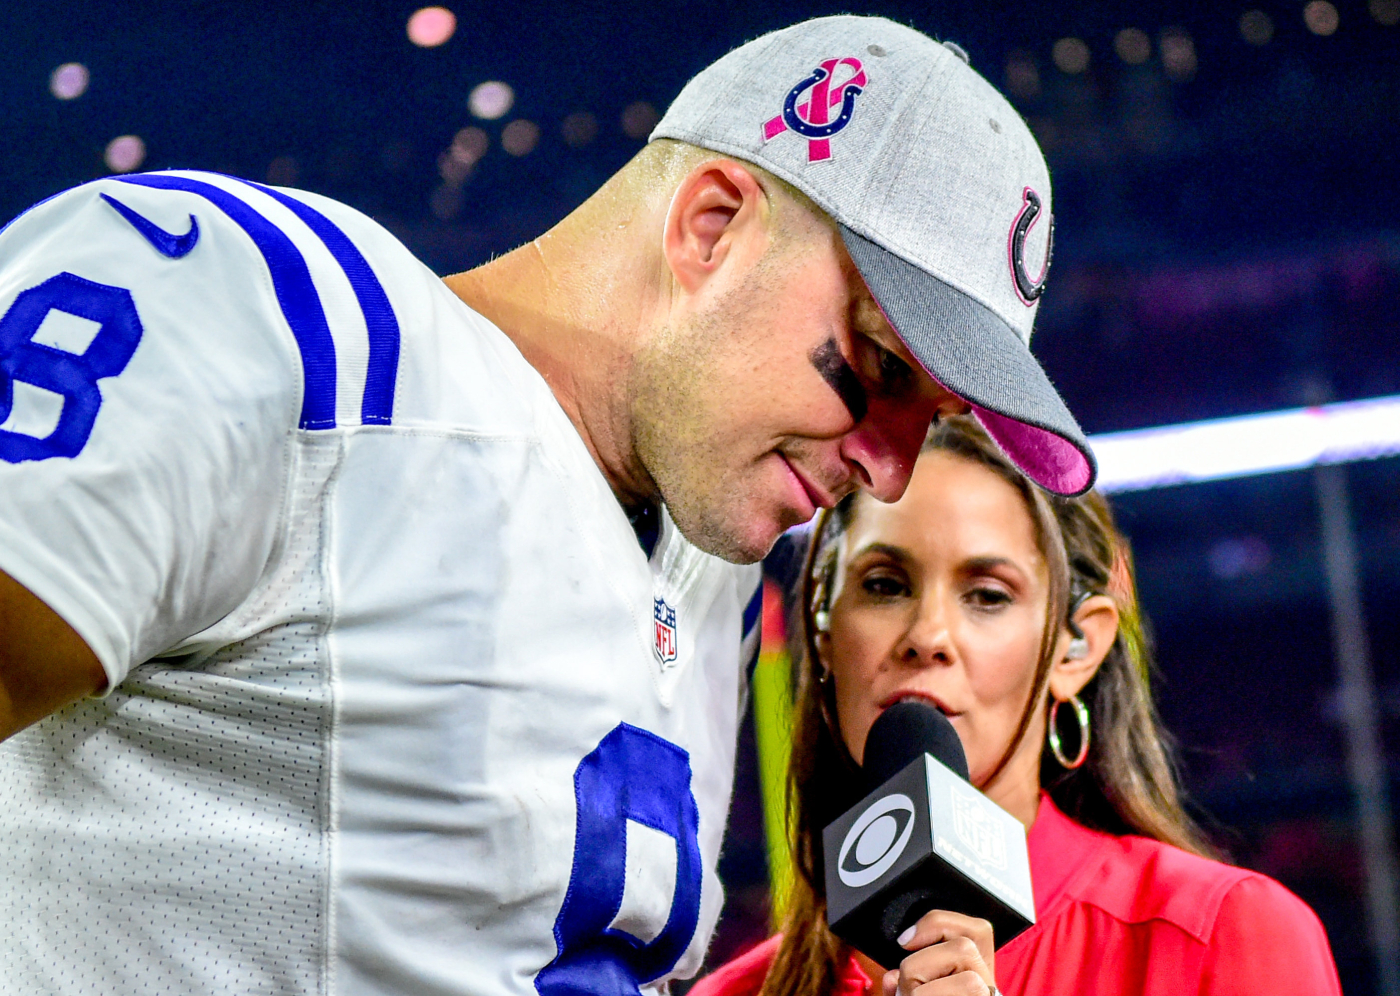 Matt Hasselbeck led the Indianapolis Colts to a win in 2015. However, he was "on his deathbed" just days before playing in the game.